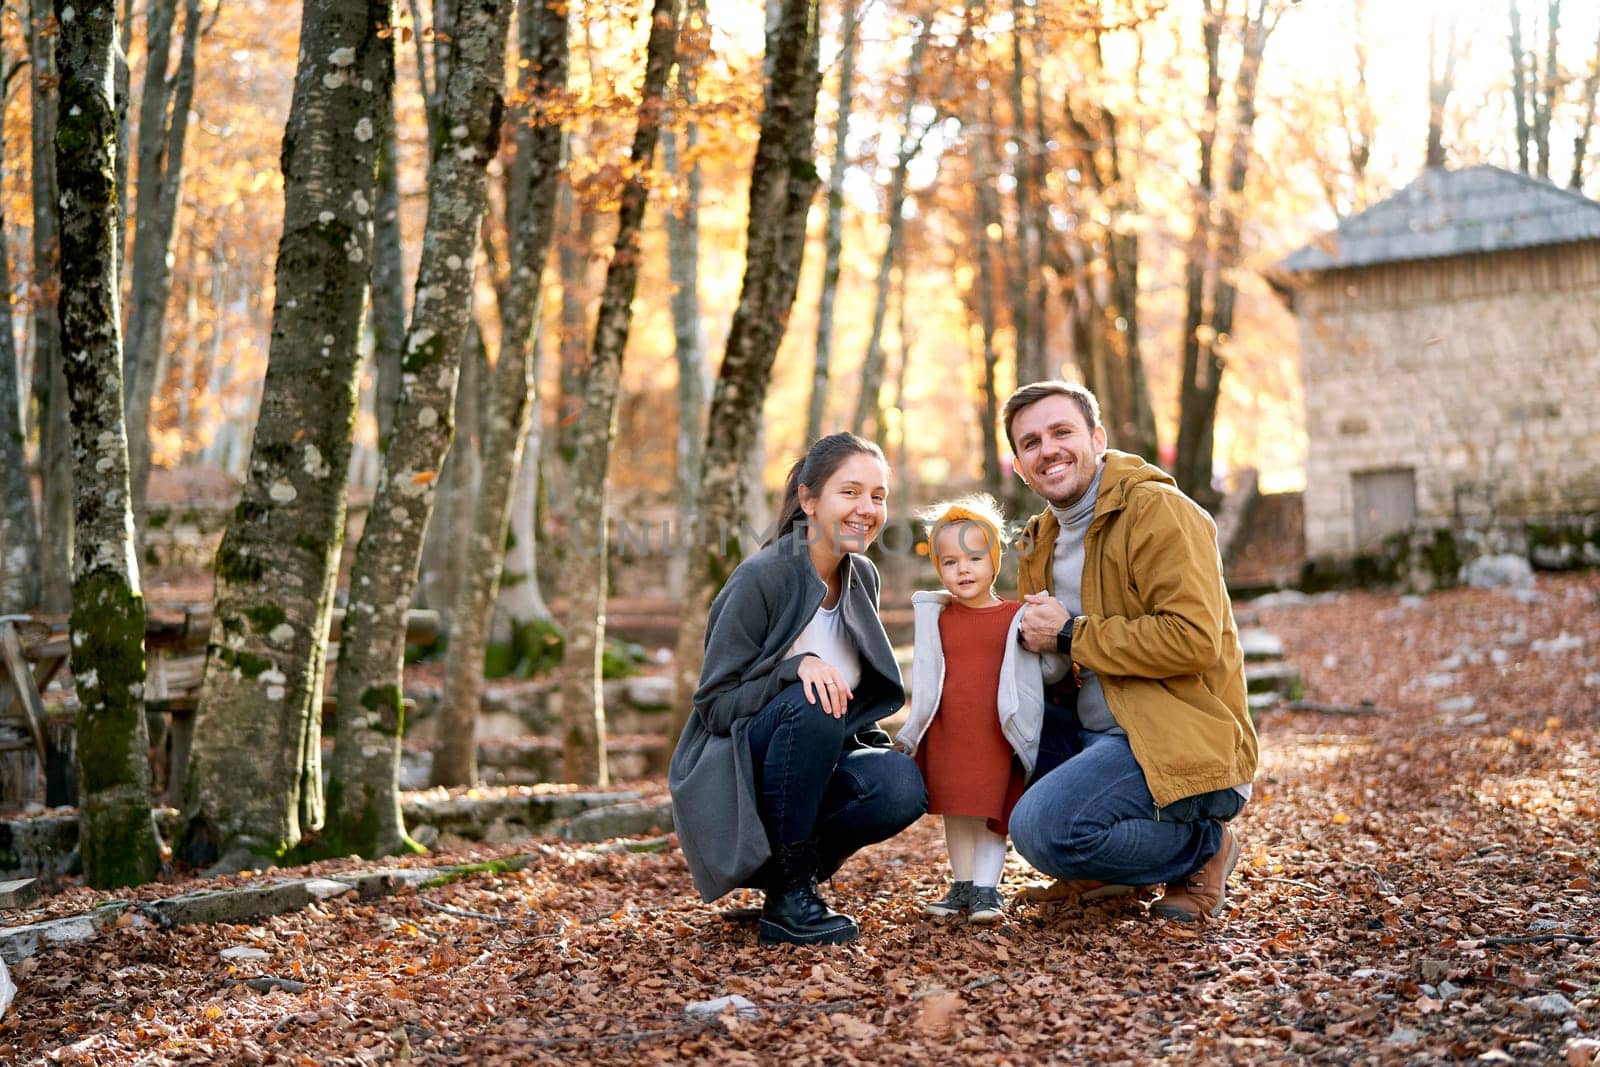 Smiling dad and mom are squatting near a little girl among fallen leaves in the forest. High quality photo